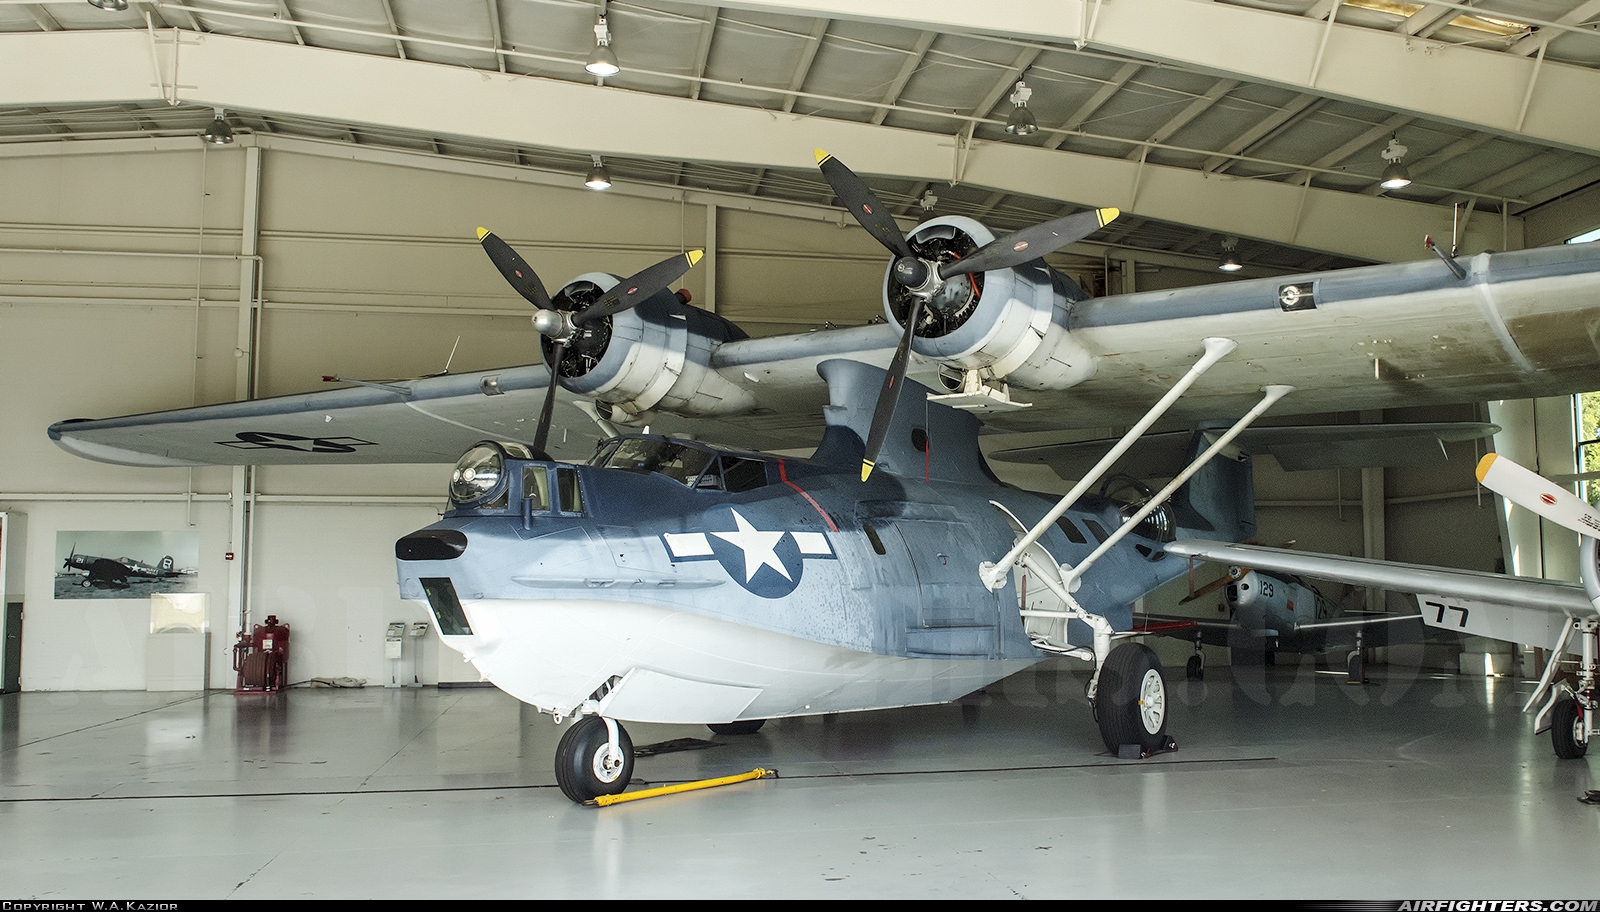 Private - Military Aviation Museum Consolidated PBY-5A Catalina N9521C at Virginia Beach Airport (42VA), USA